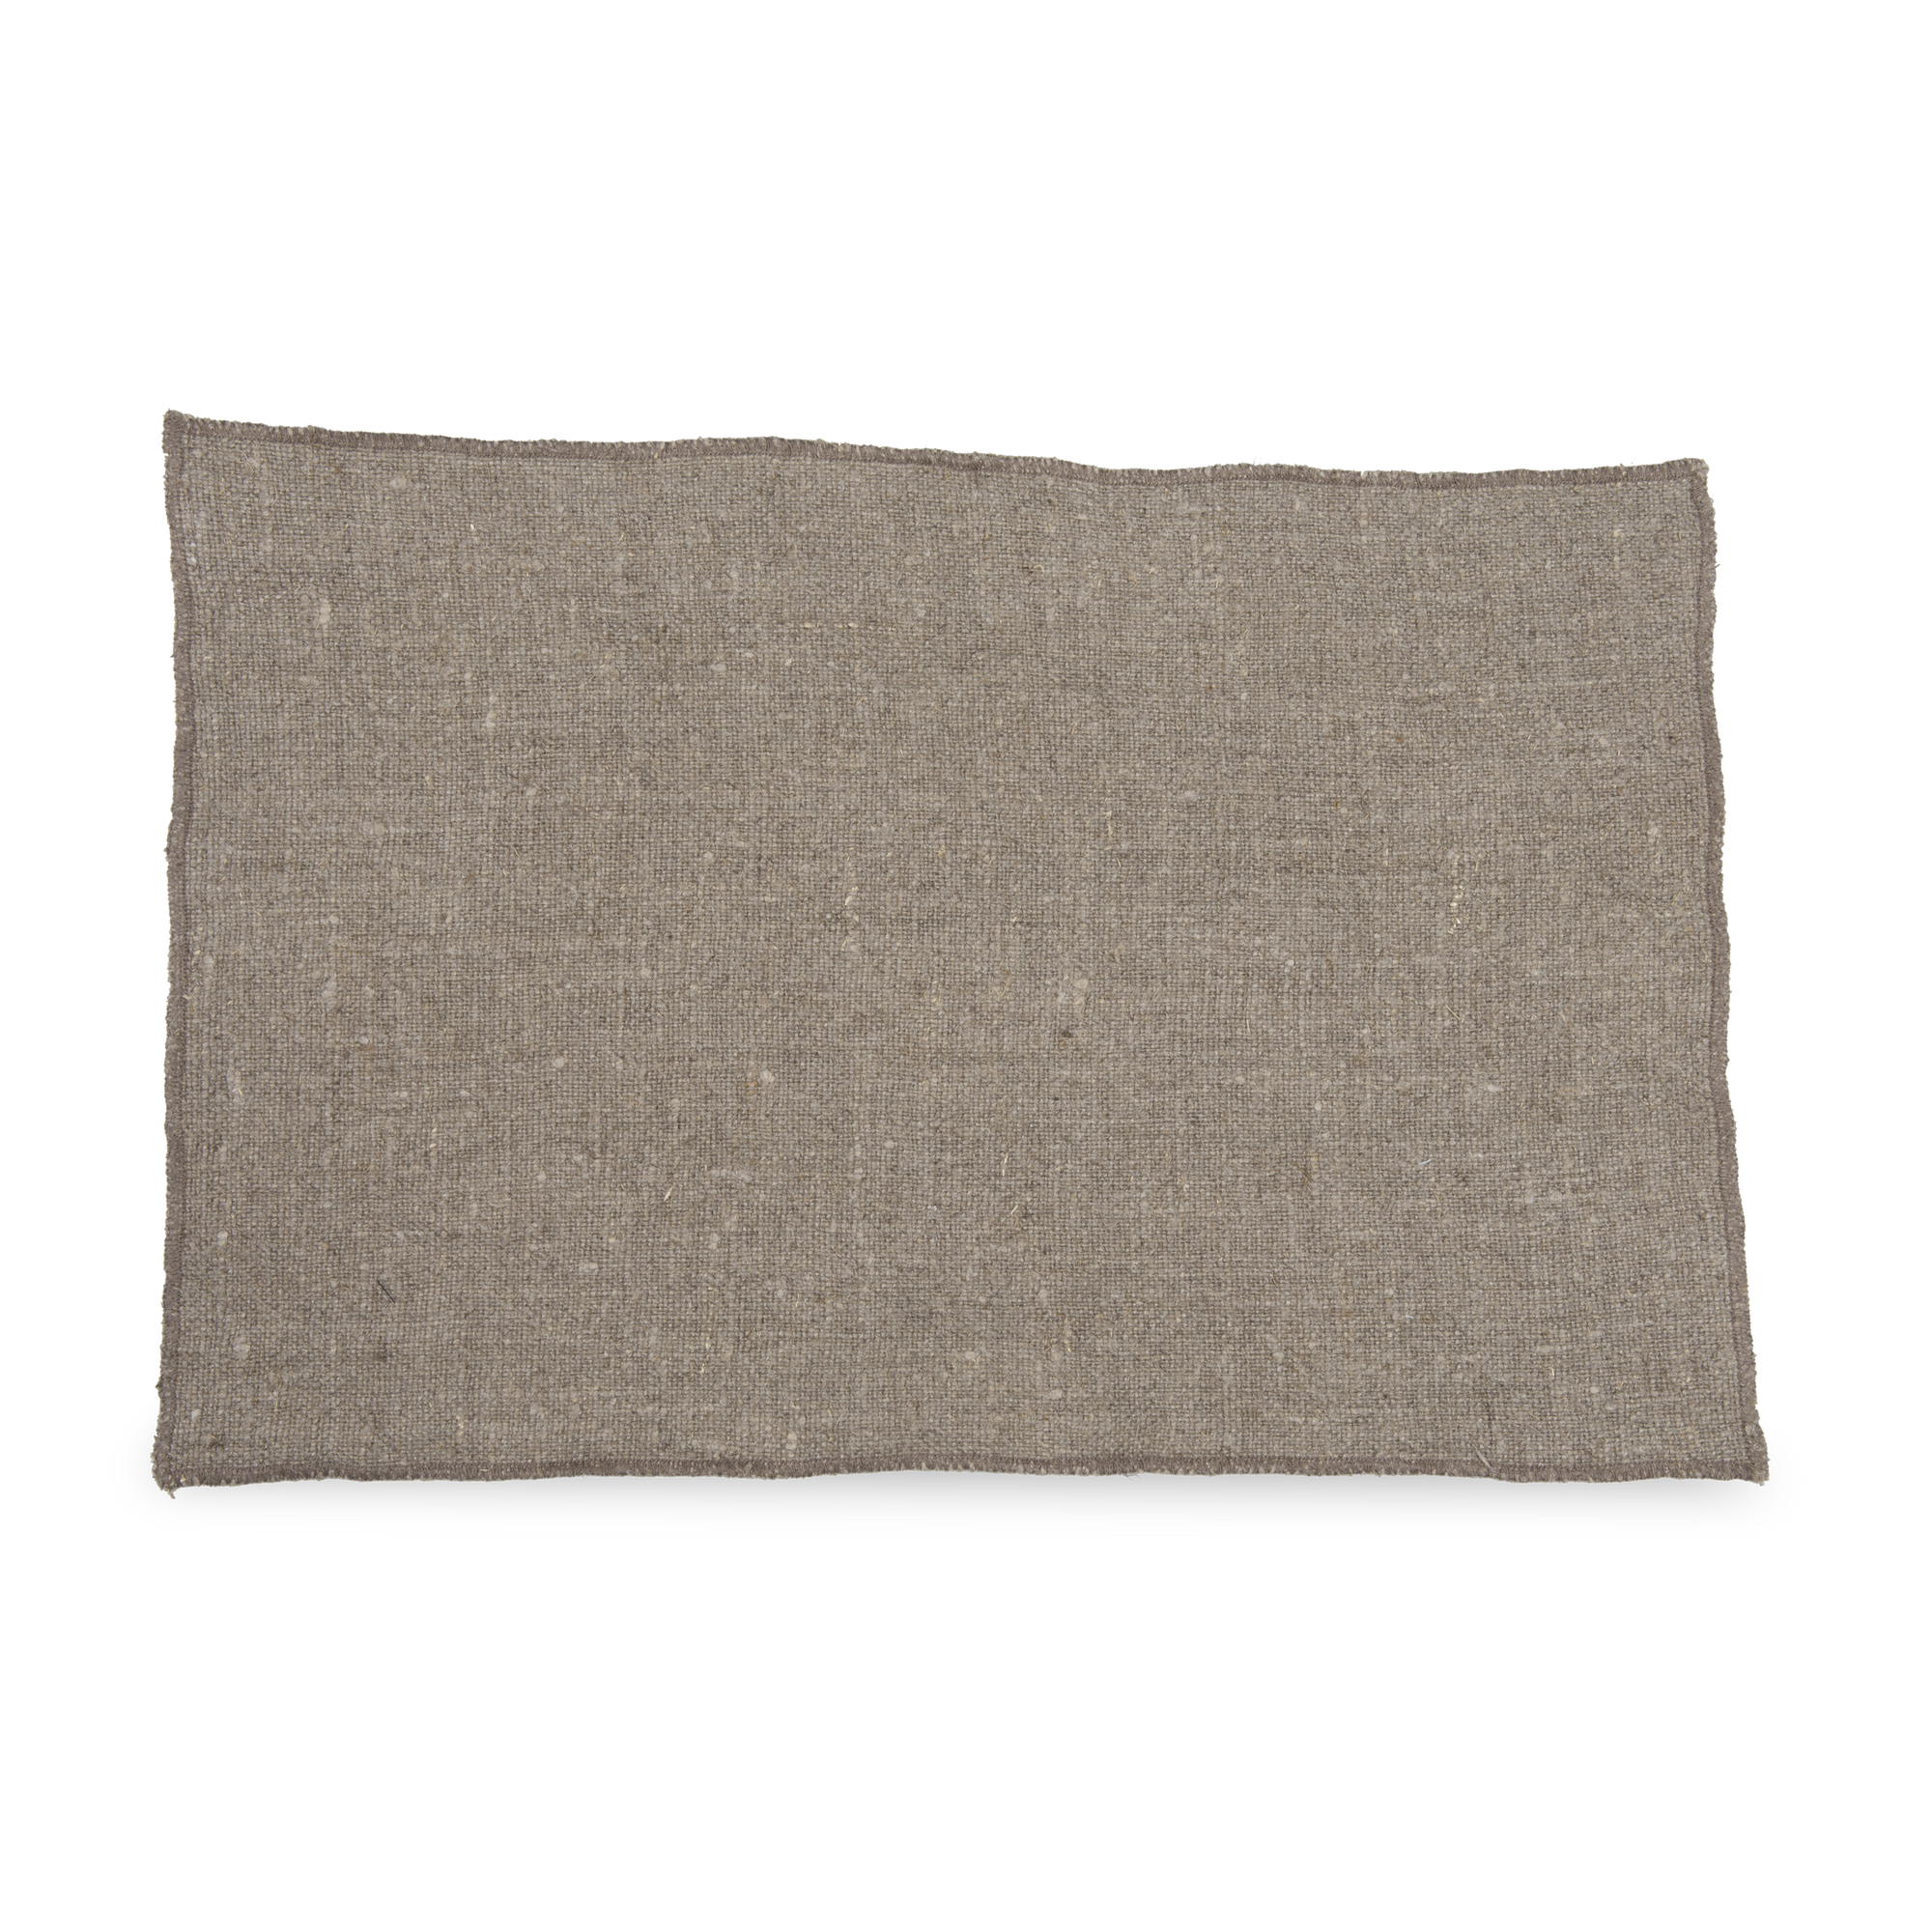 The Slub Linen Placemat features relaxed textural linen finished with tonal border stitching.